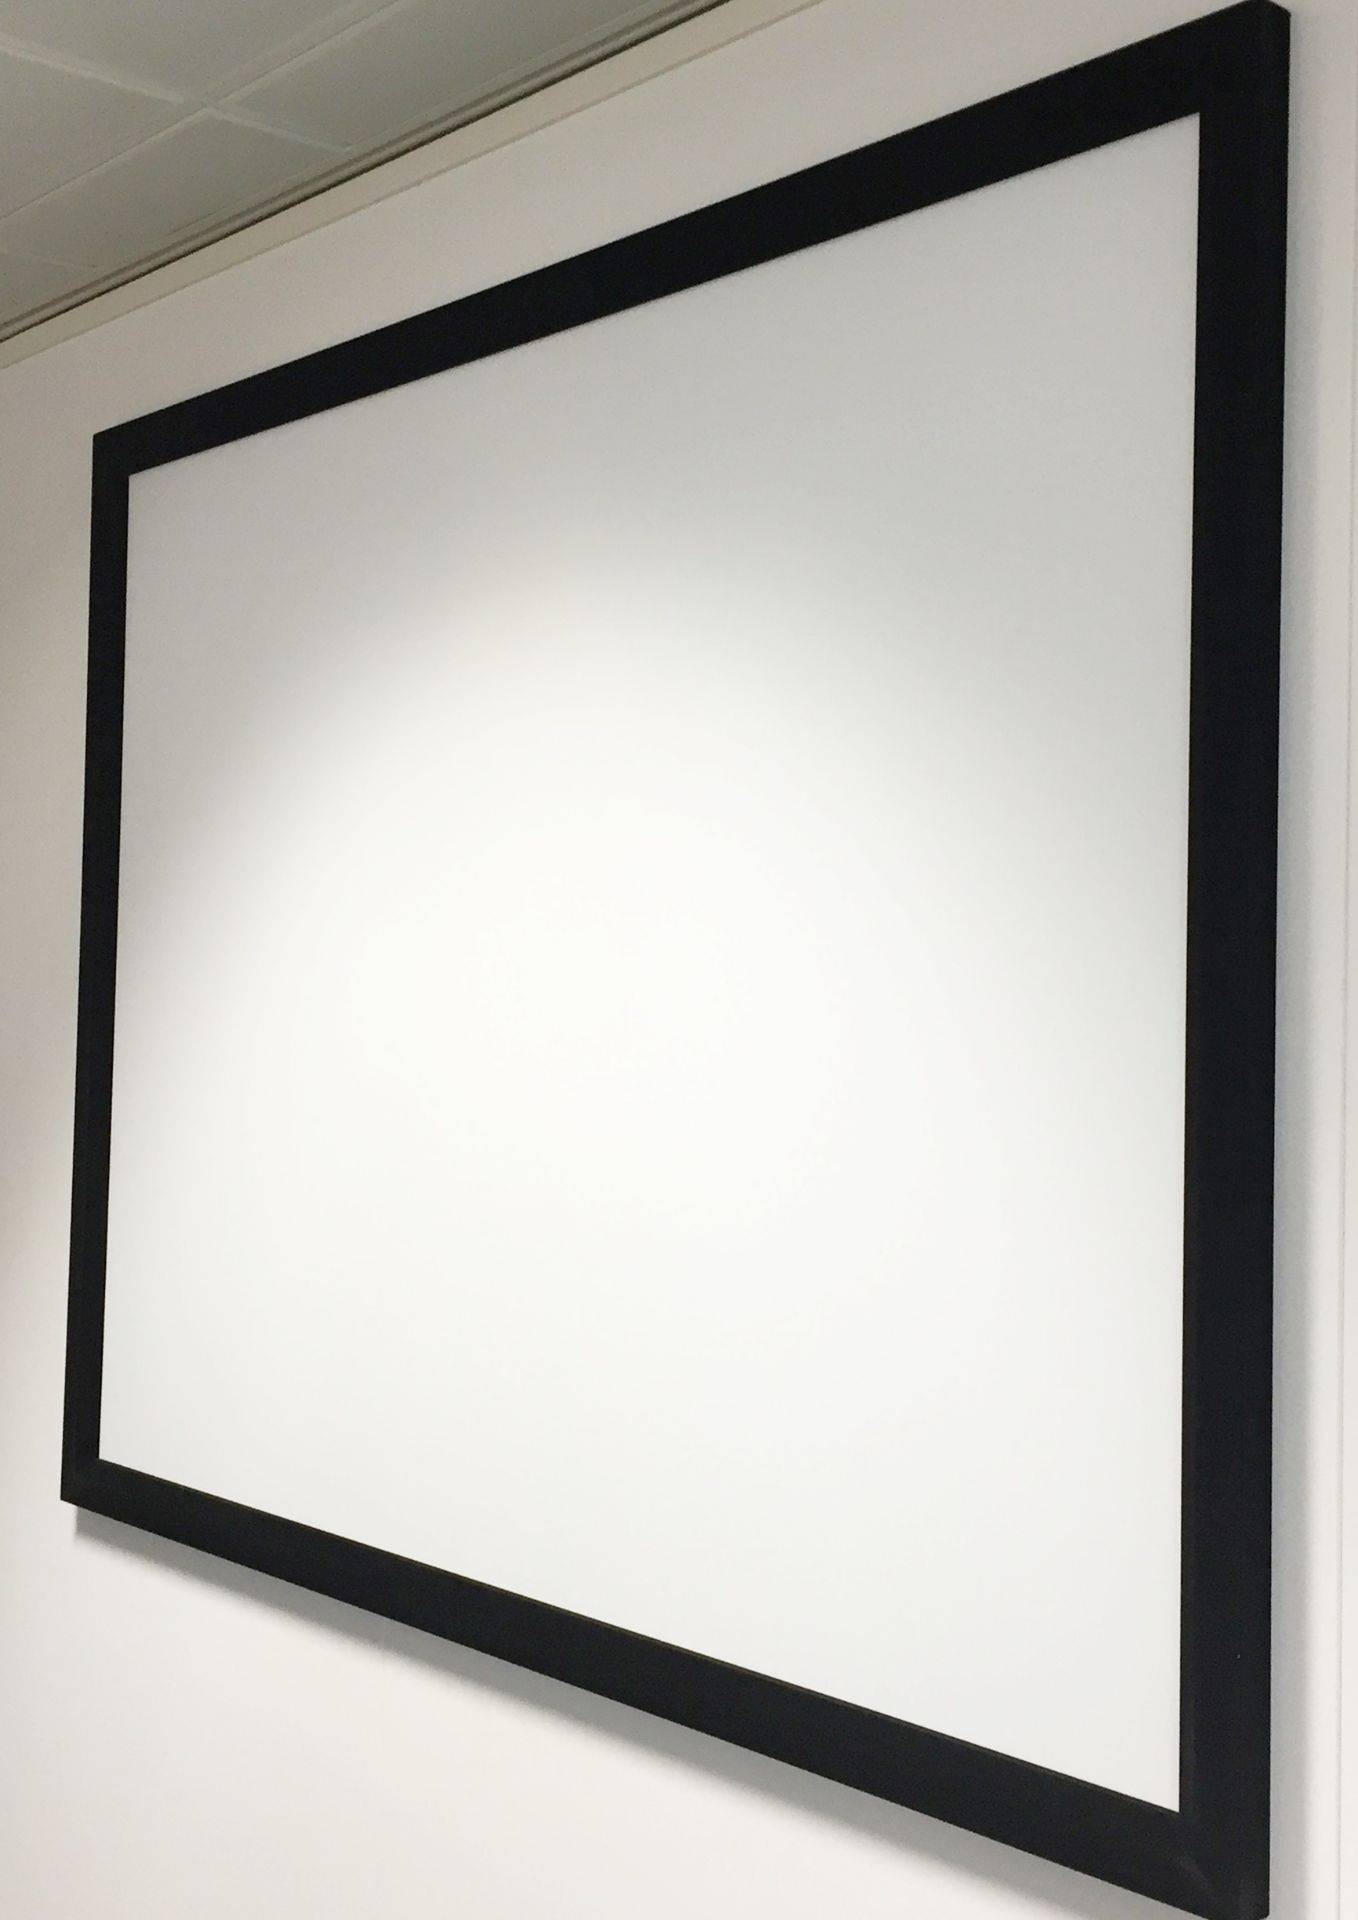 1 x Fixed Frame CINEMATIC Projection Screen - Large Size With Deep Black Velvet Fixed Surround Surro - Image 5 of 5